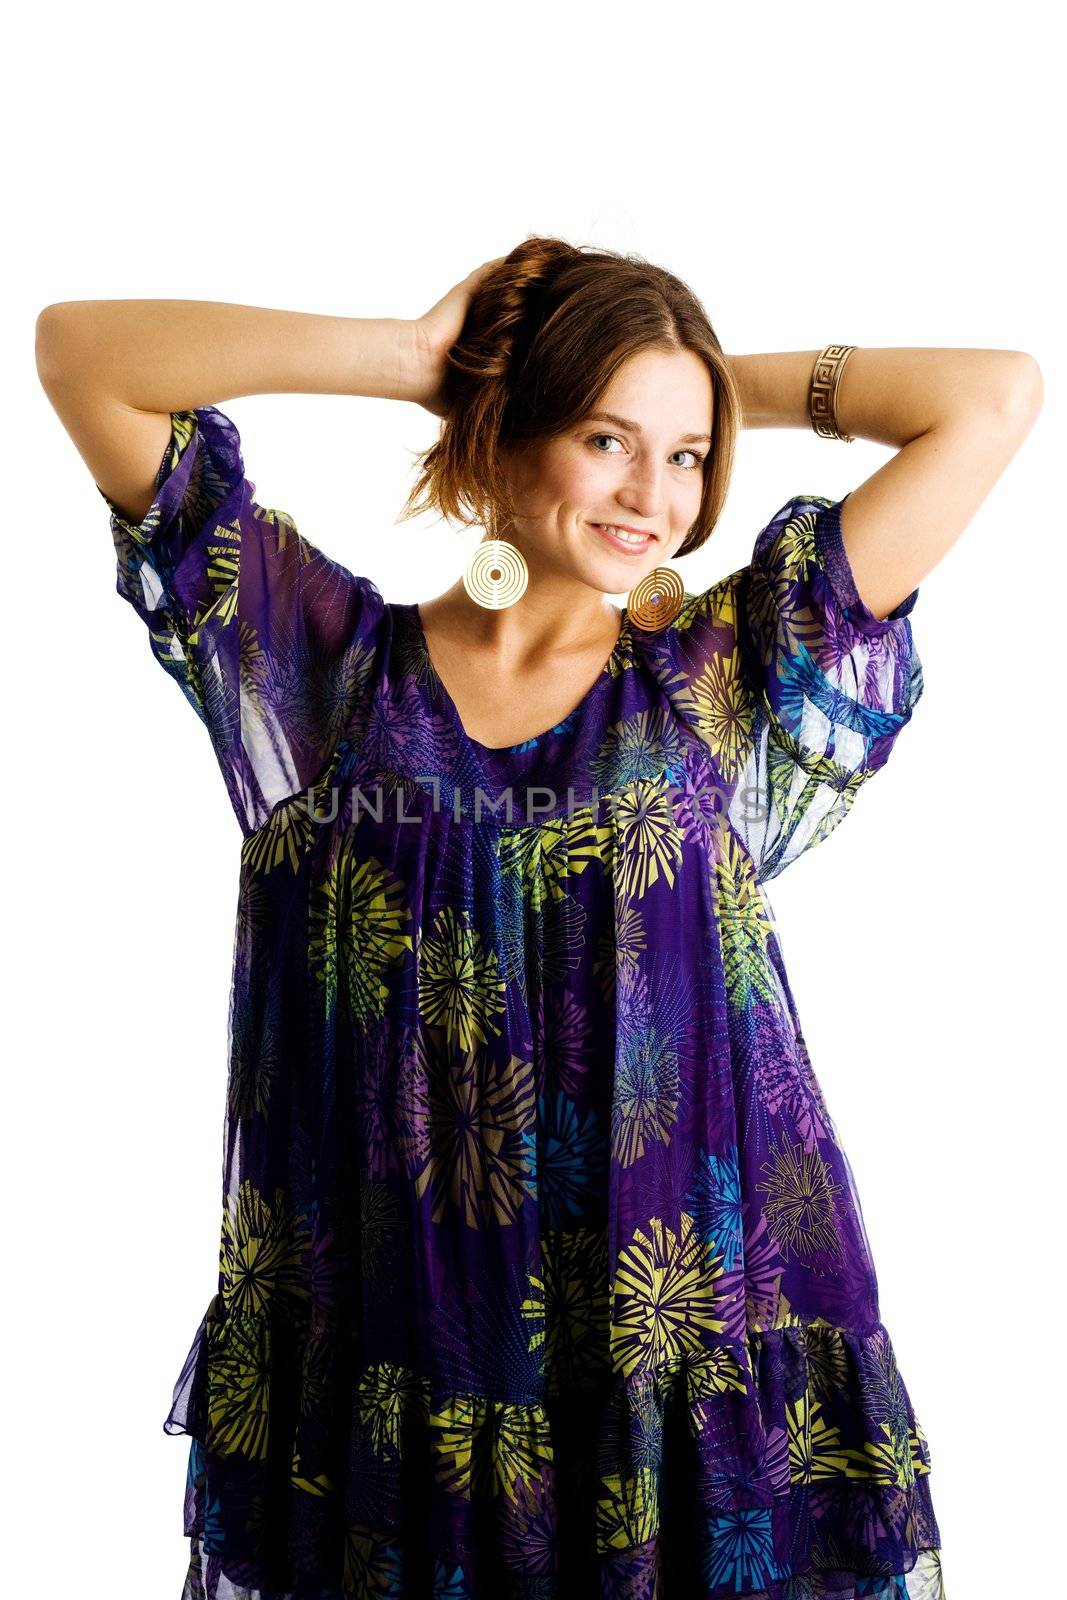 An image of a beautiful girl in violet dress